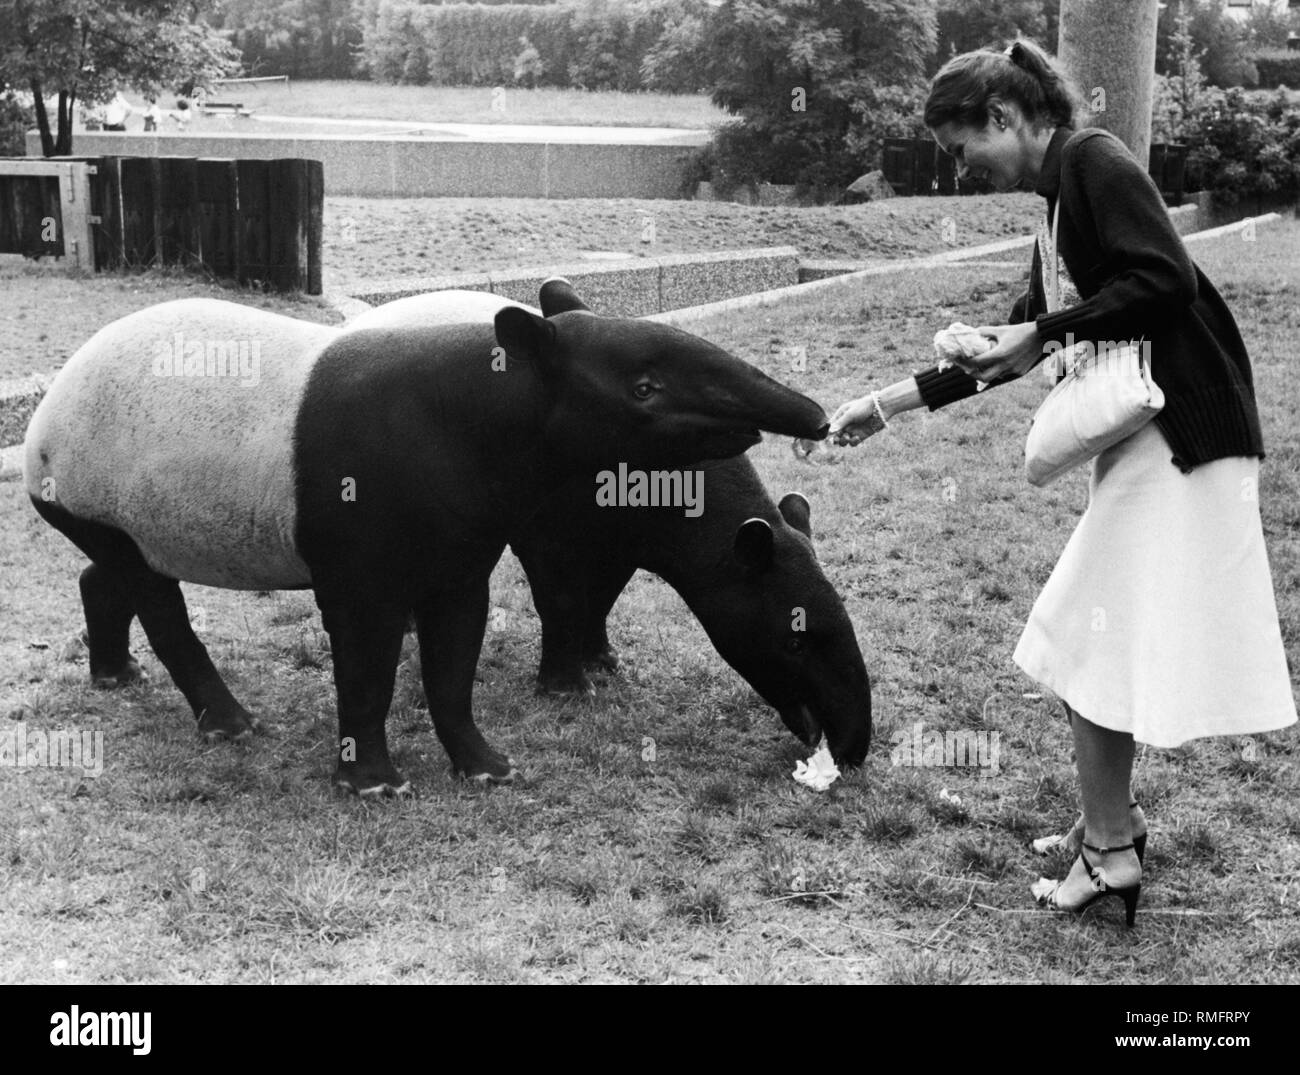 The Munich Zoo Hellabrunn accommodates two tapirs, a male borrowed from the zoo in Amsterdam and a female donated by Rolf Goldschagg (member of the Tierpark-Foerderkreis and shareholder of the Sueddeutscher Verlag). Here, his daughter Gisela Goldschagg feeds the tapirs. Stock Photo